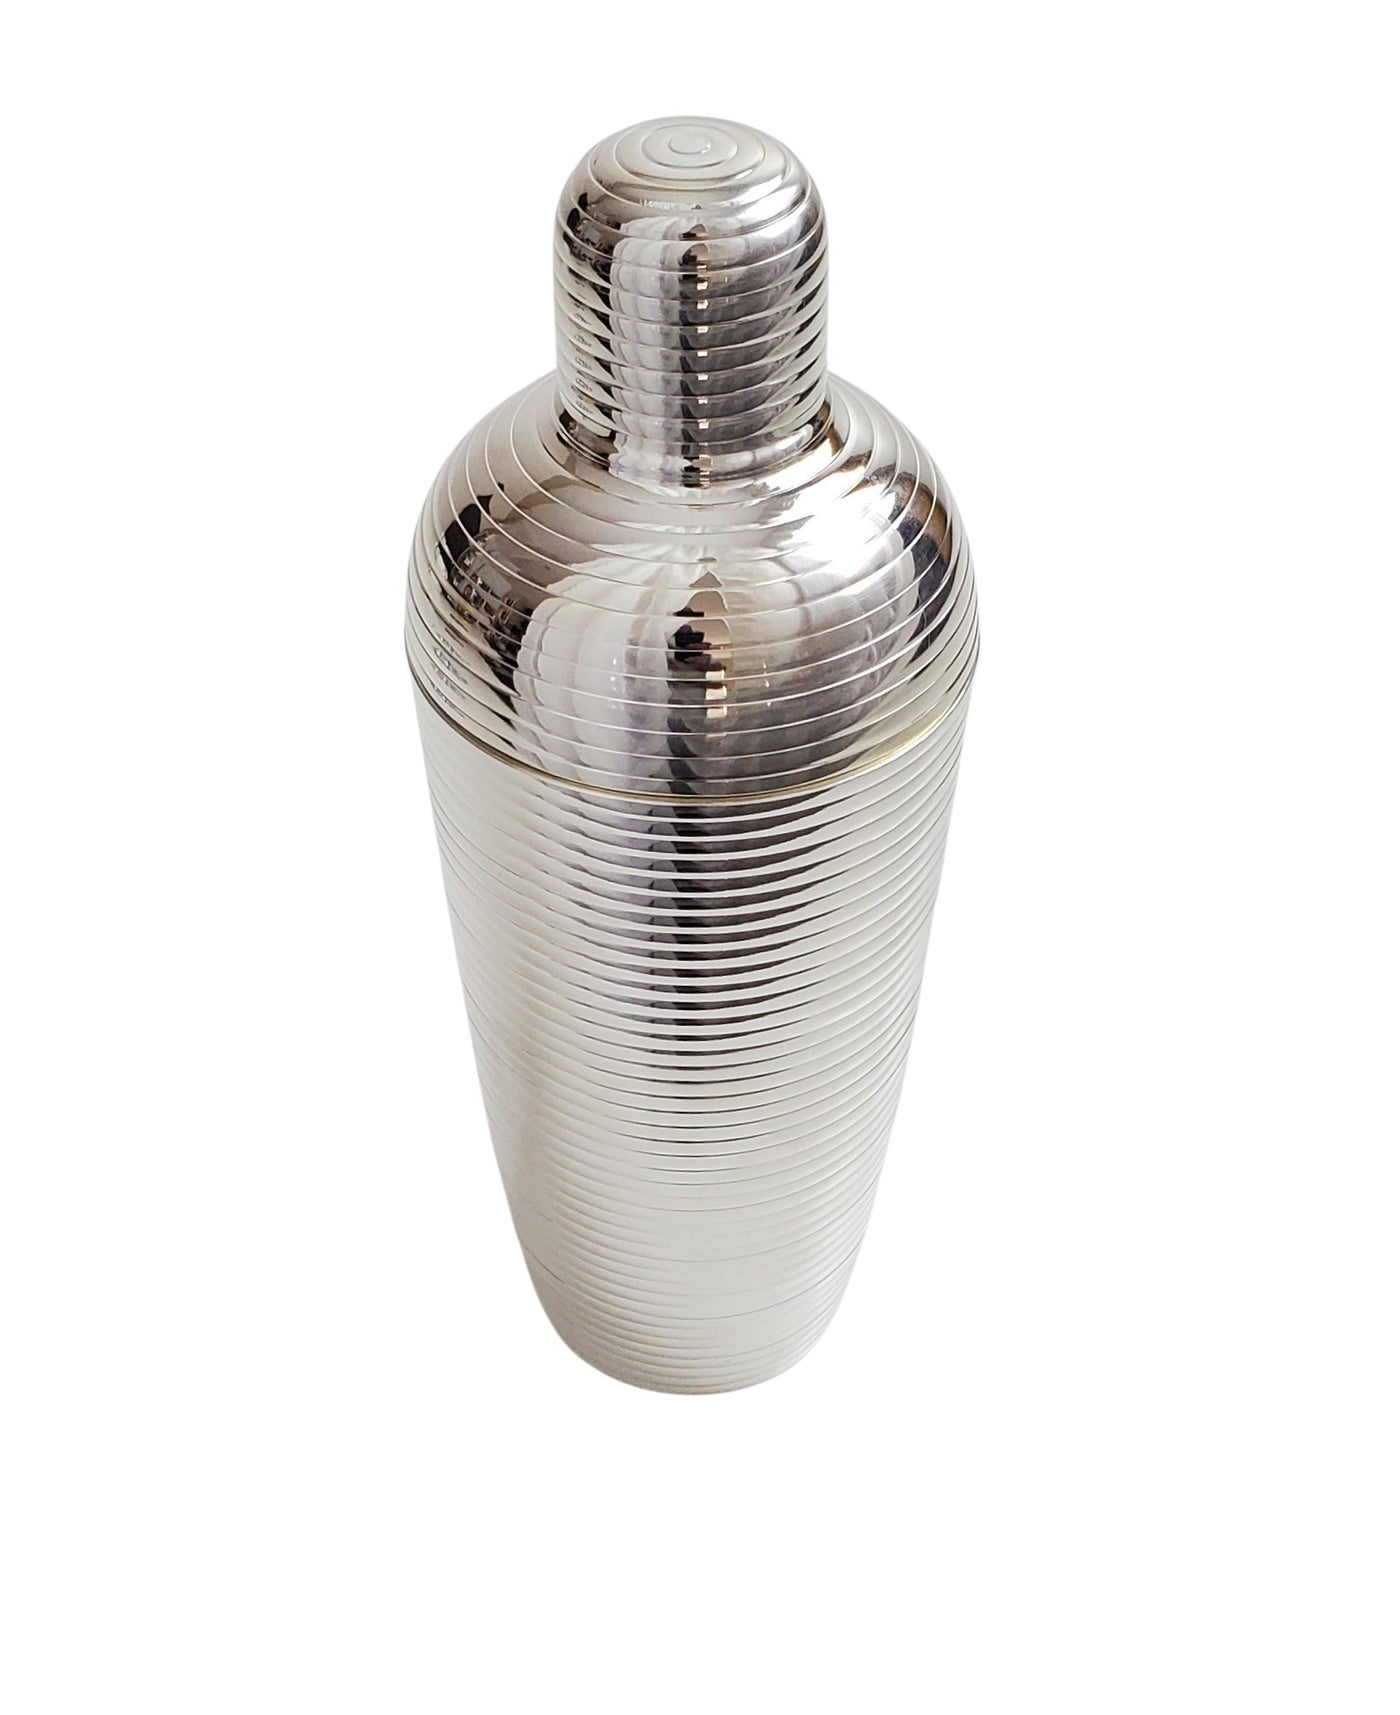 COCKTAIL SHAKER FULLY RIBBED SILVER PLATED